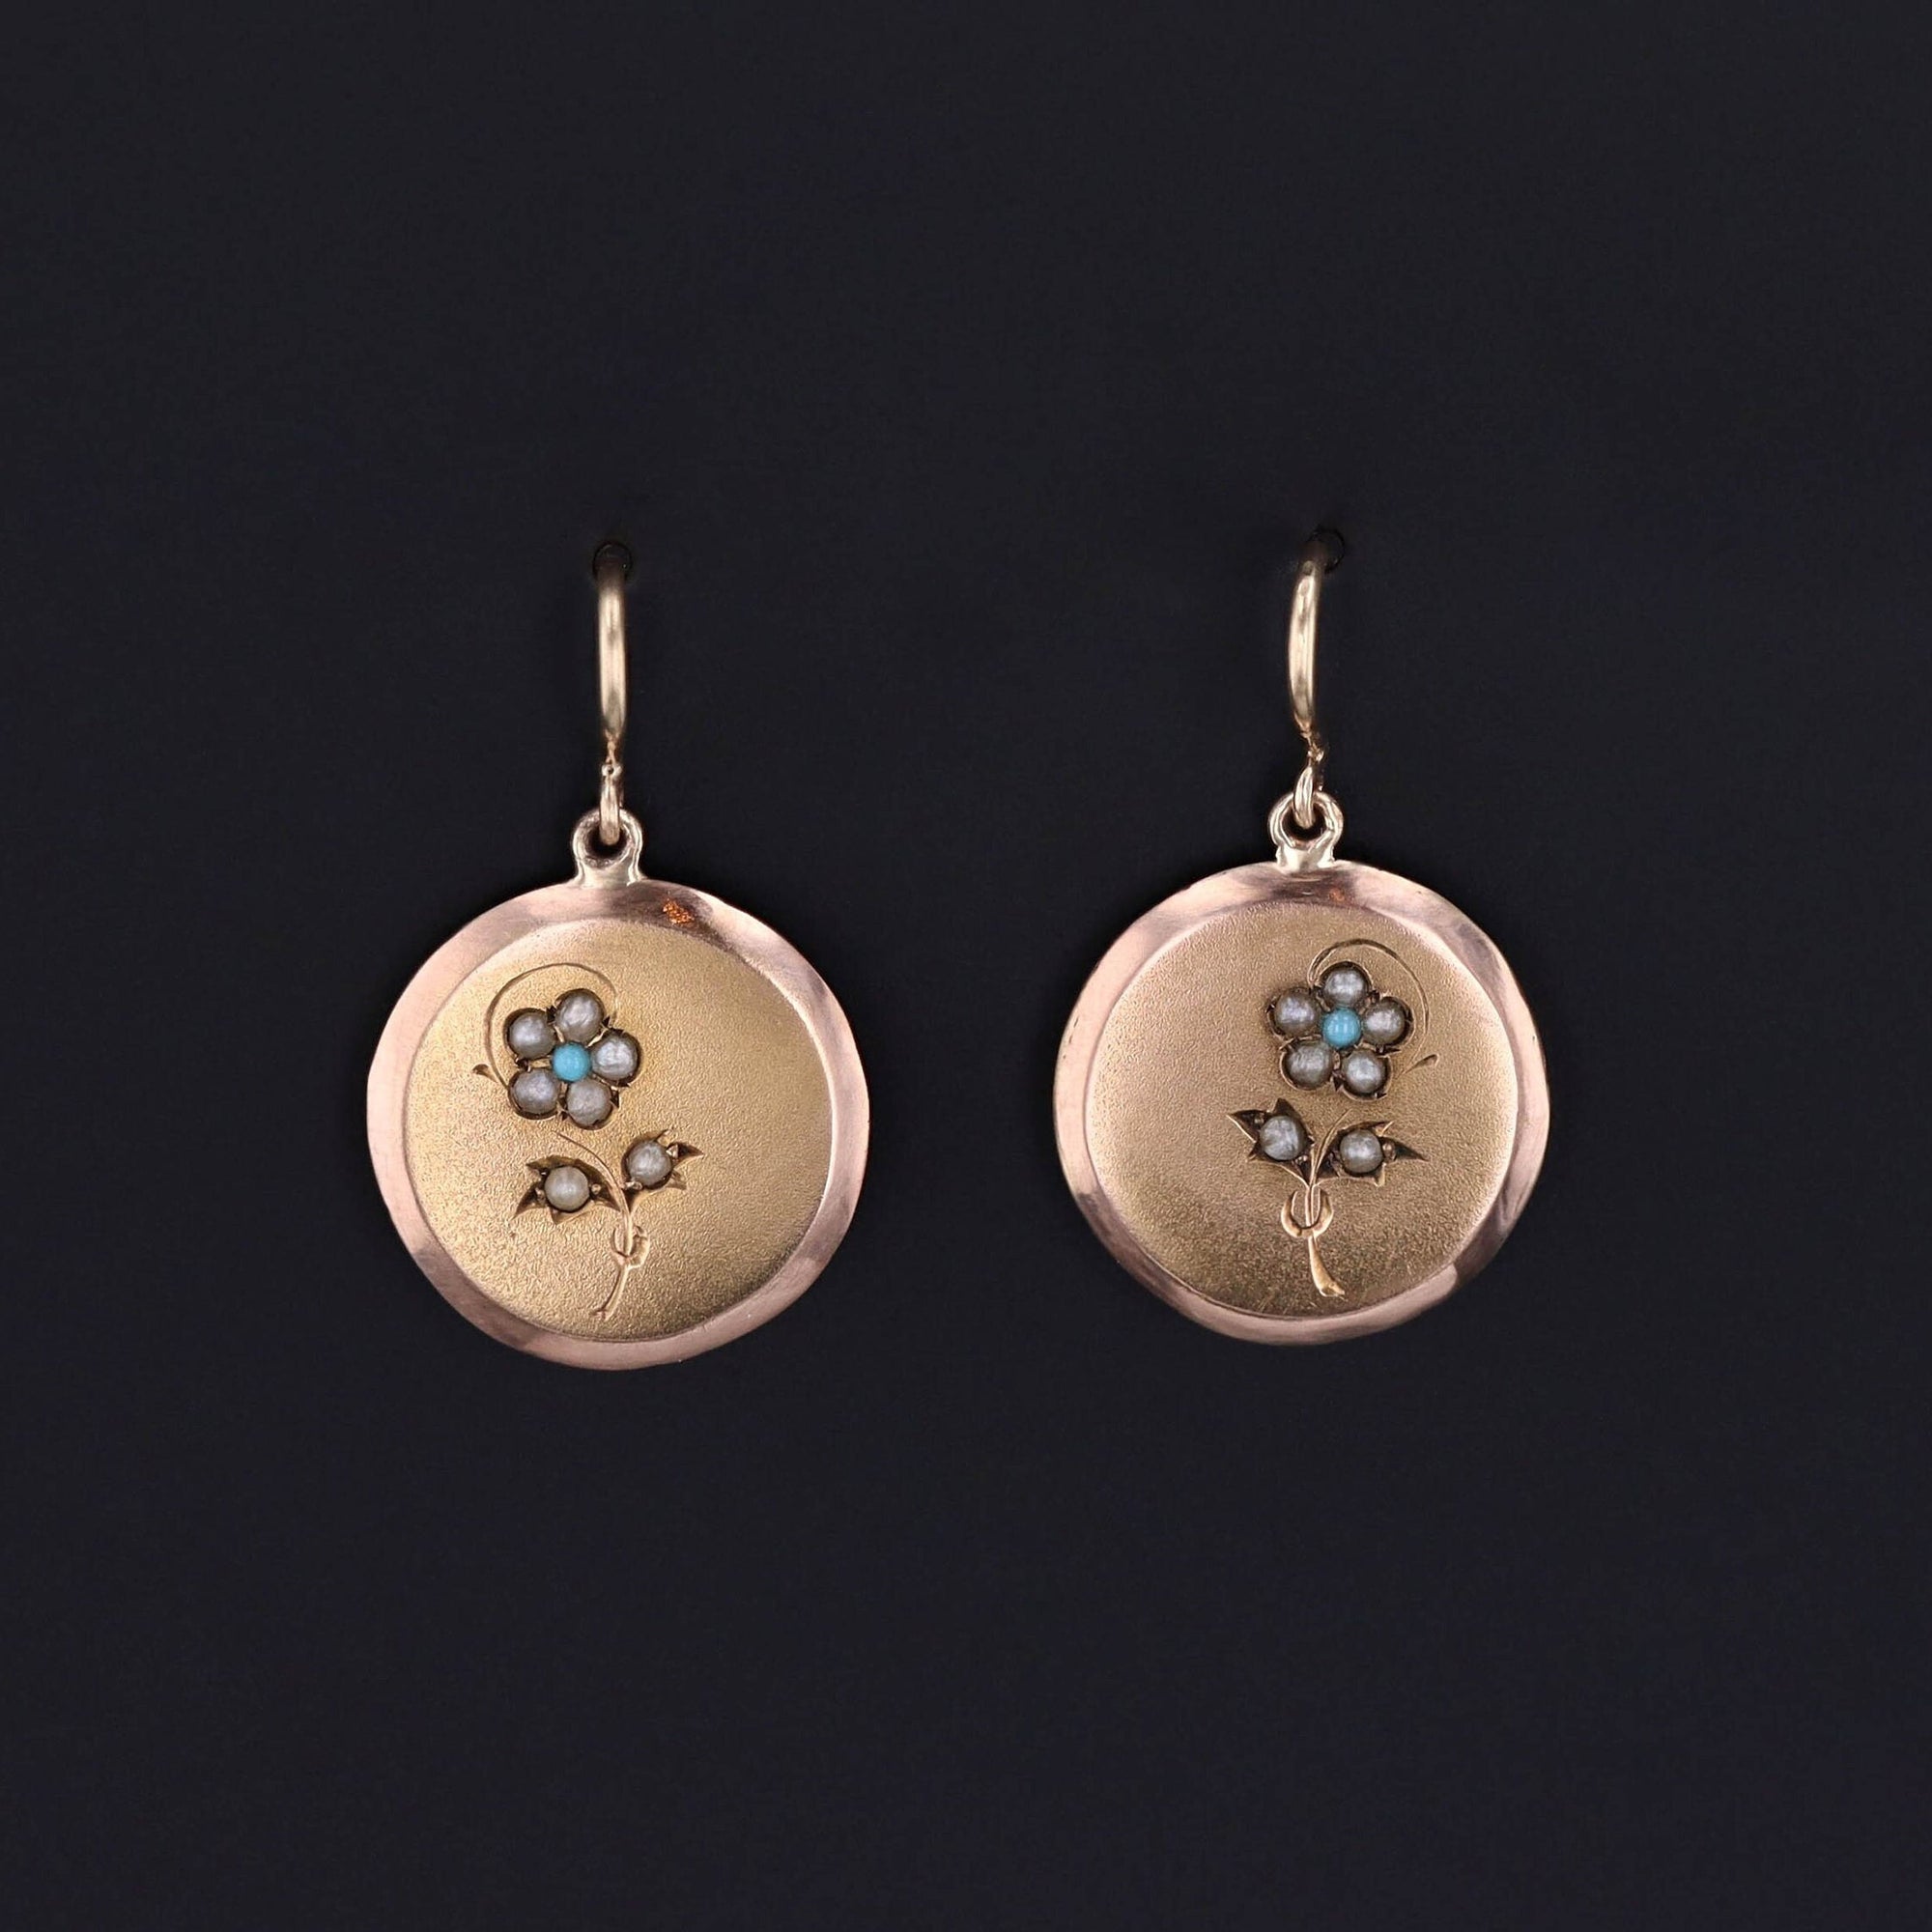 Antique Flower Earrings of 14k Gold with Turquoise and Pearl